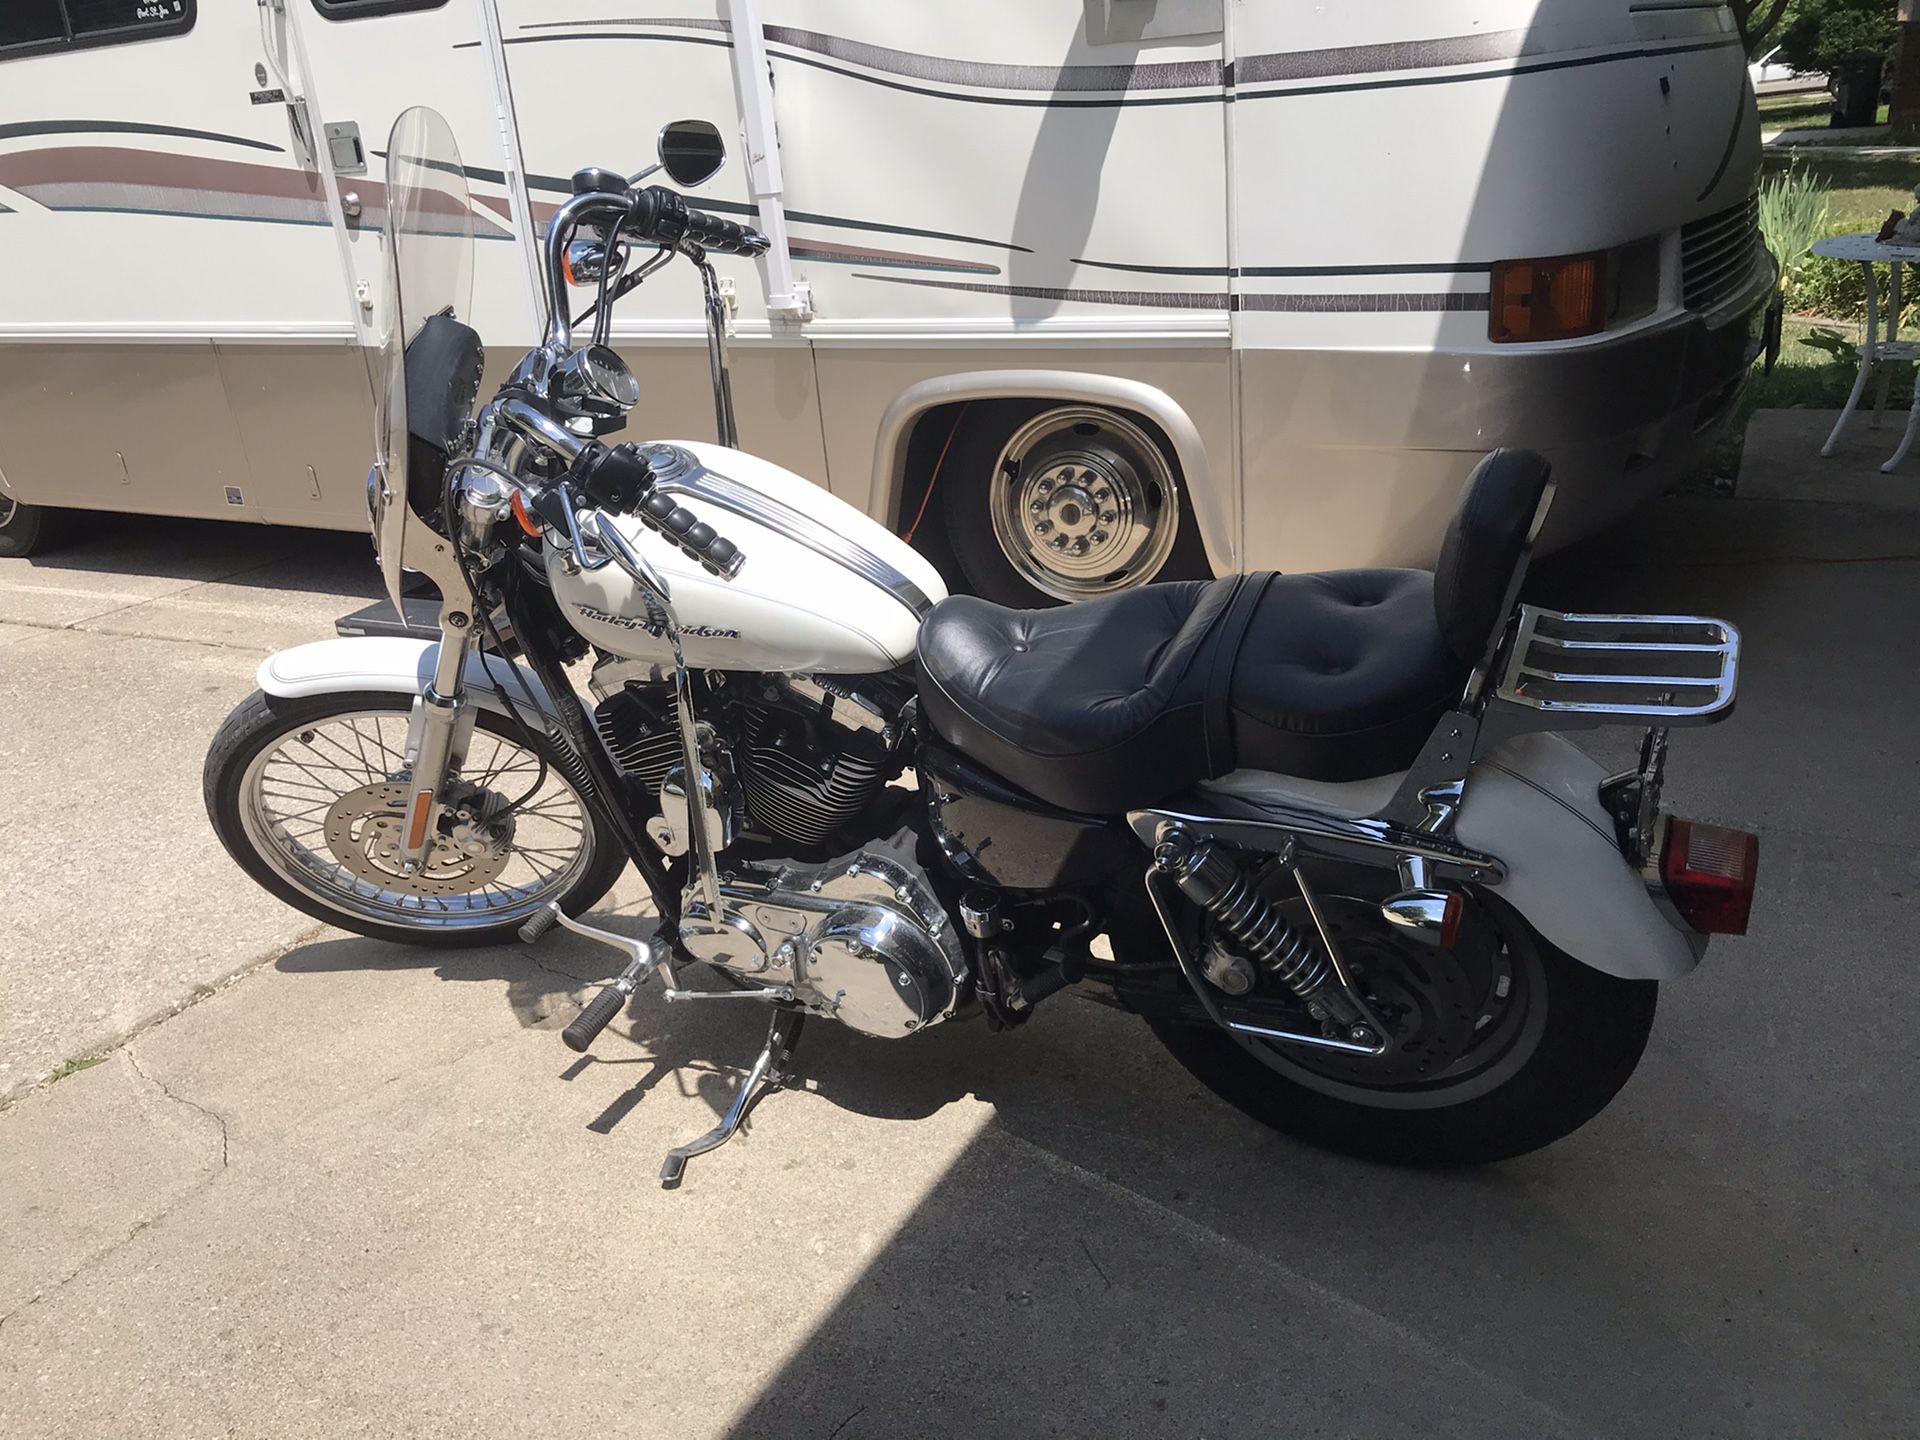 2004 1200cc 2004 Harley Davidson Pearl white/blue lettering new battery,new air filter new plugs easy detachable windshild bigger gas tank 11,500 mil